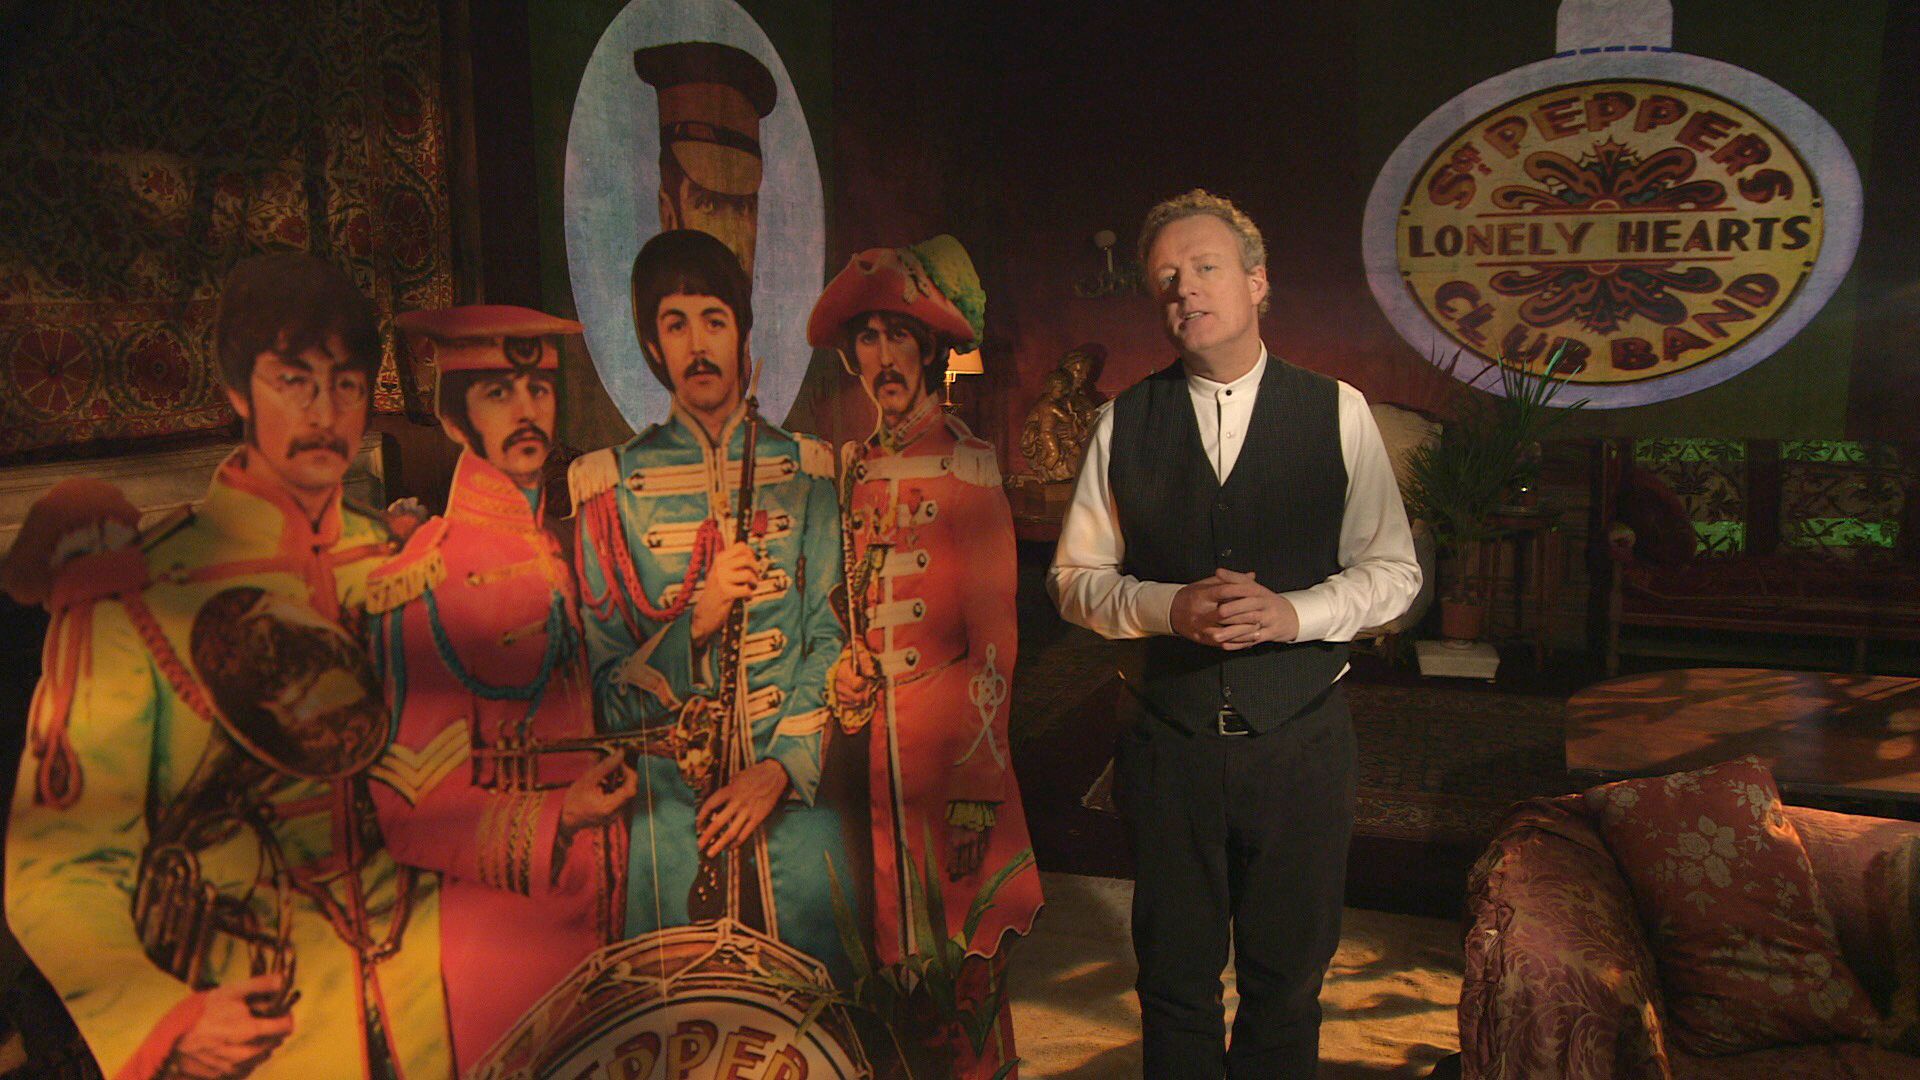 The BBC To Celebrate The 50th Anniversary of Sgt. Pepper's Lonely